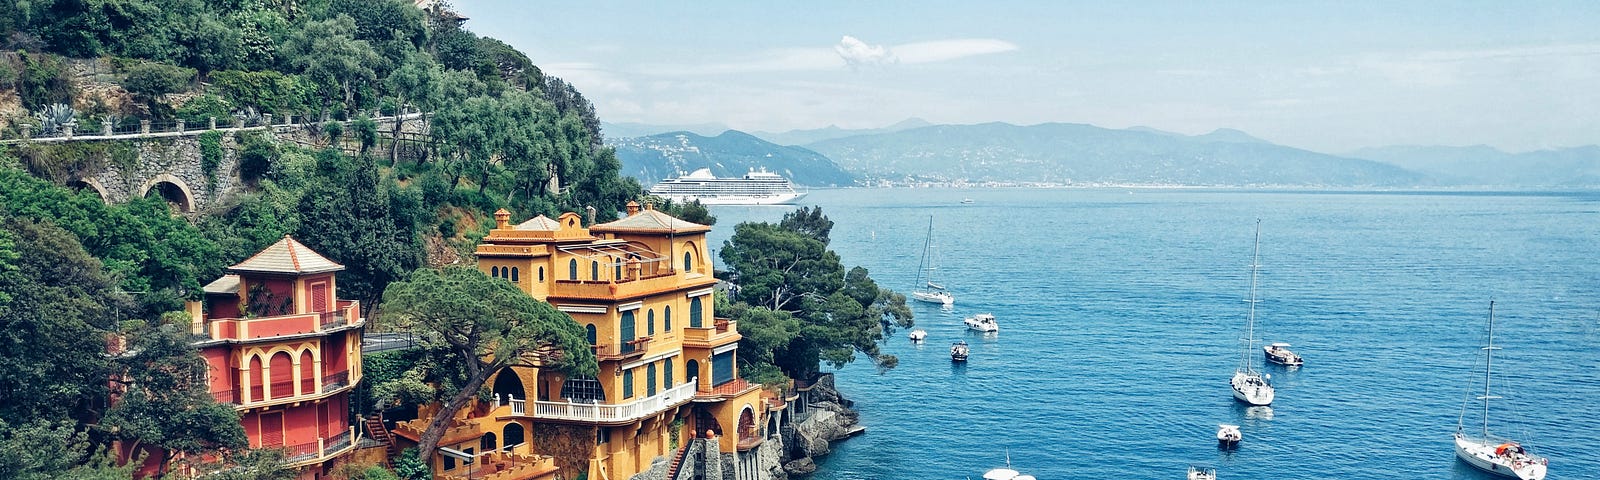 Large yellow mansion perched on a cliff overlooking an inlet on the sea near Portofino. There are many small boats moored and mountains can be seen in the distance.